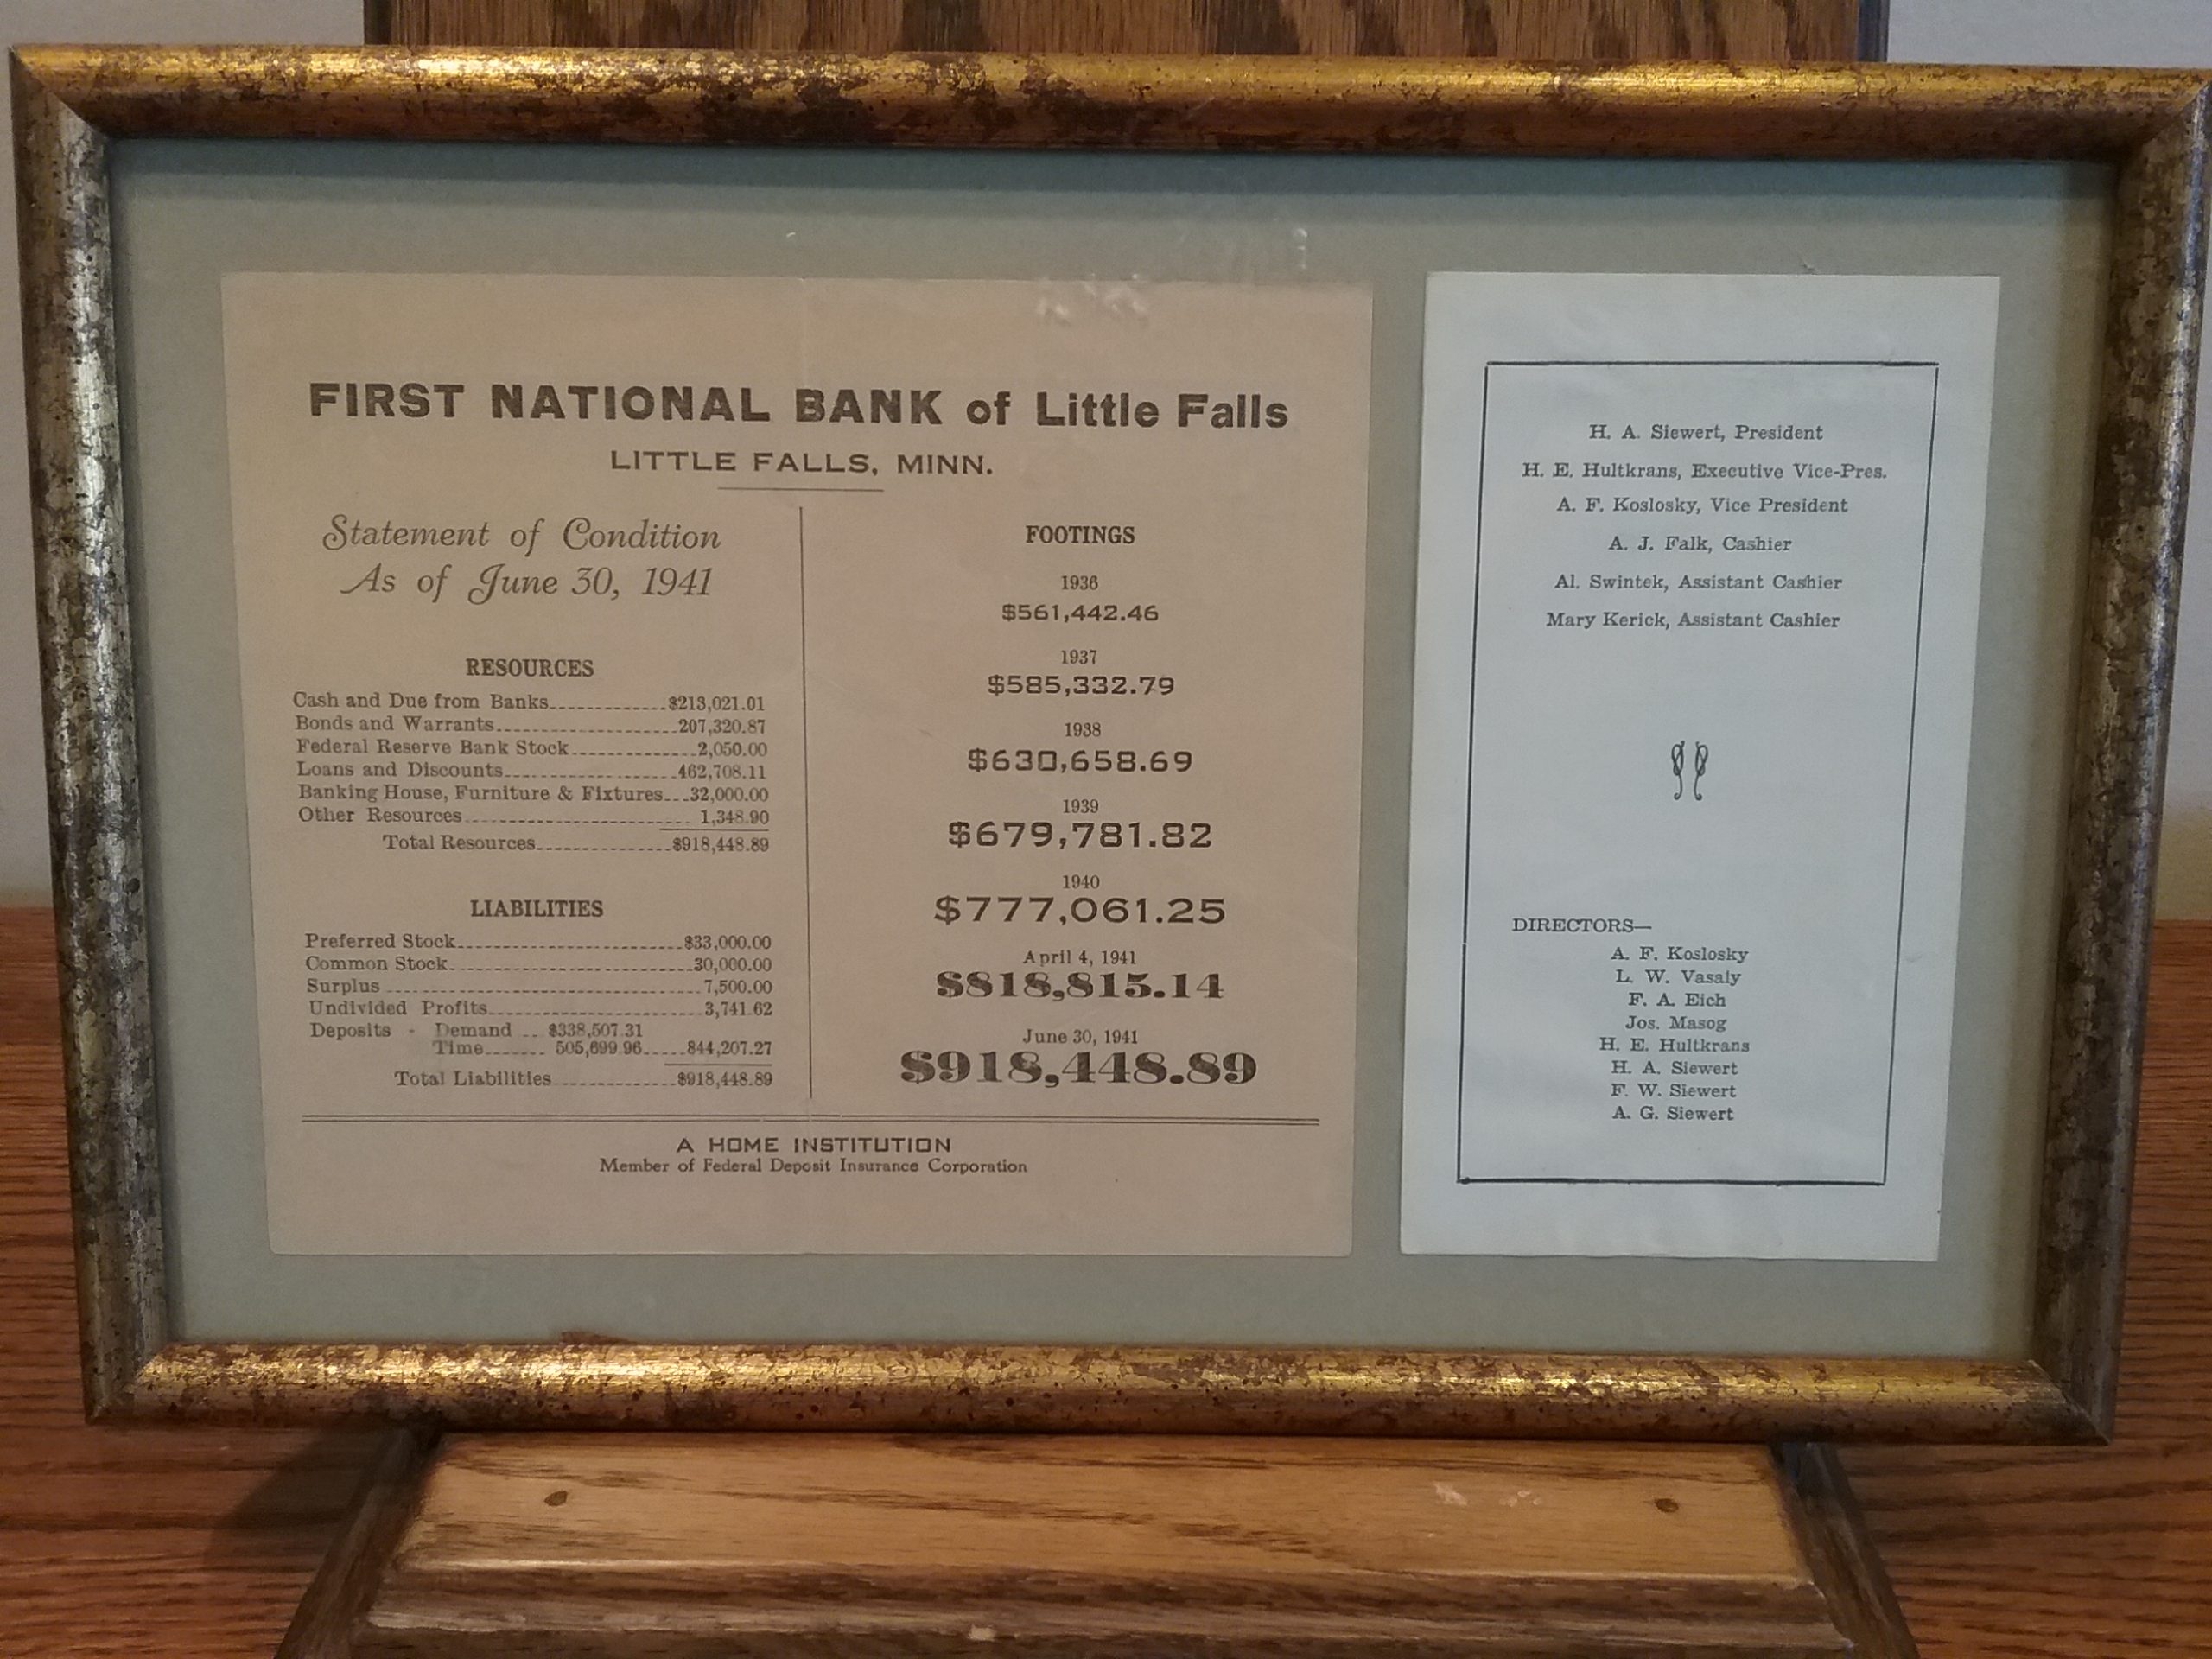 Framed documents showing First National Bank of Little Falls Statement of Condition as of June 30, 1941, and list of bank management and directors, donated by U.S. Bank.